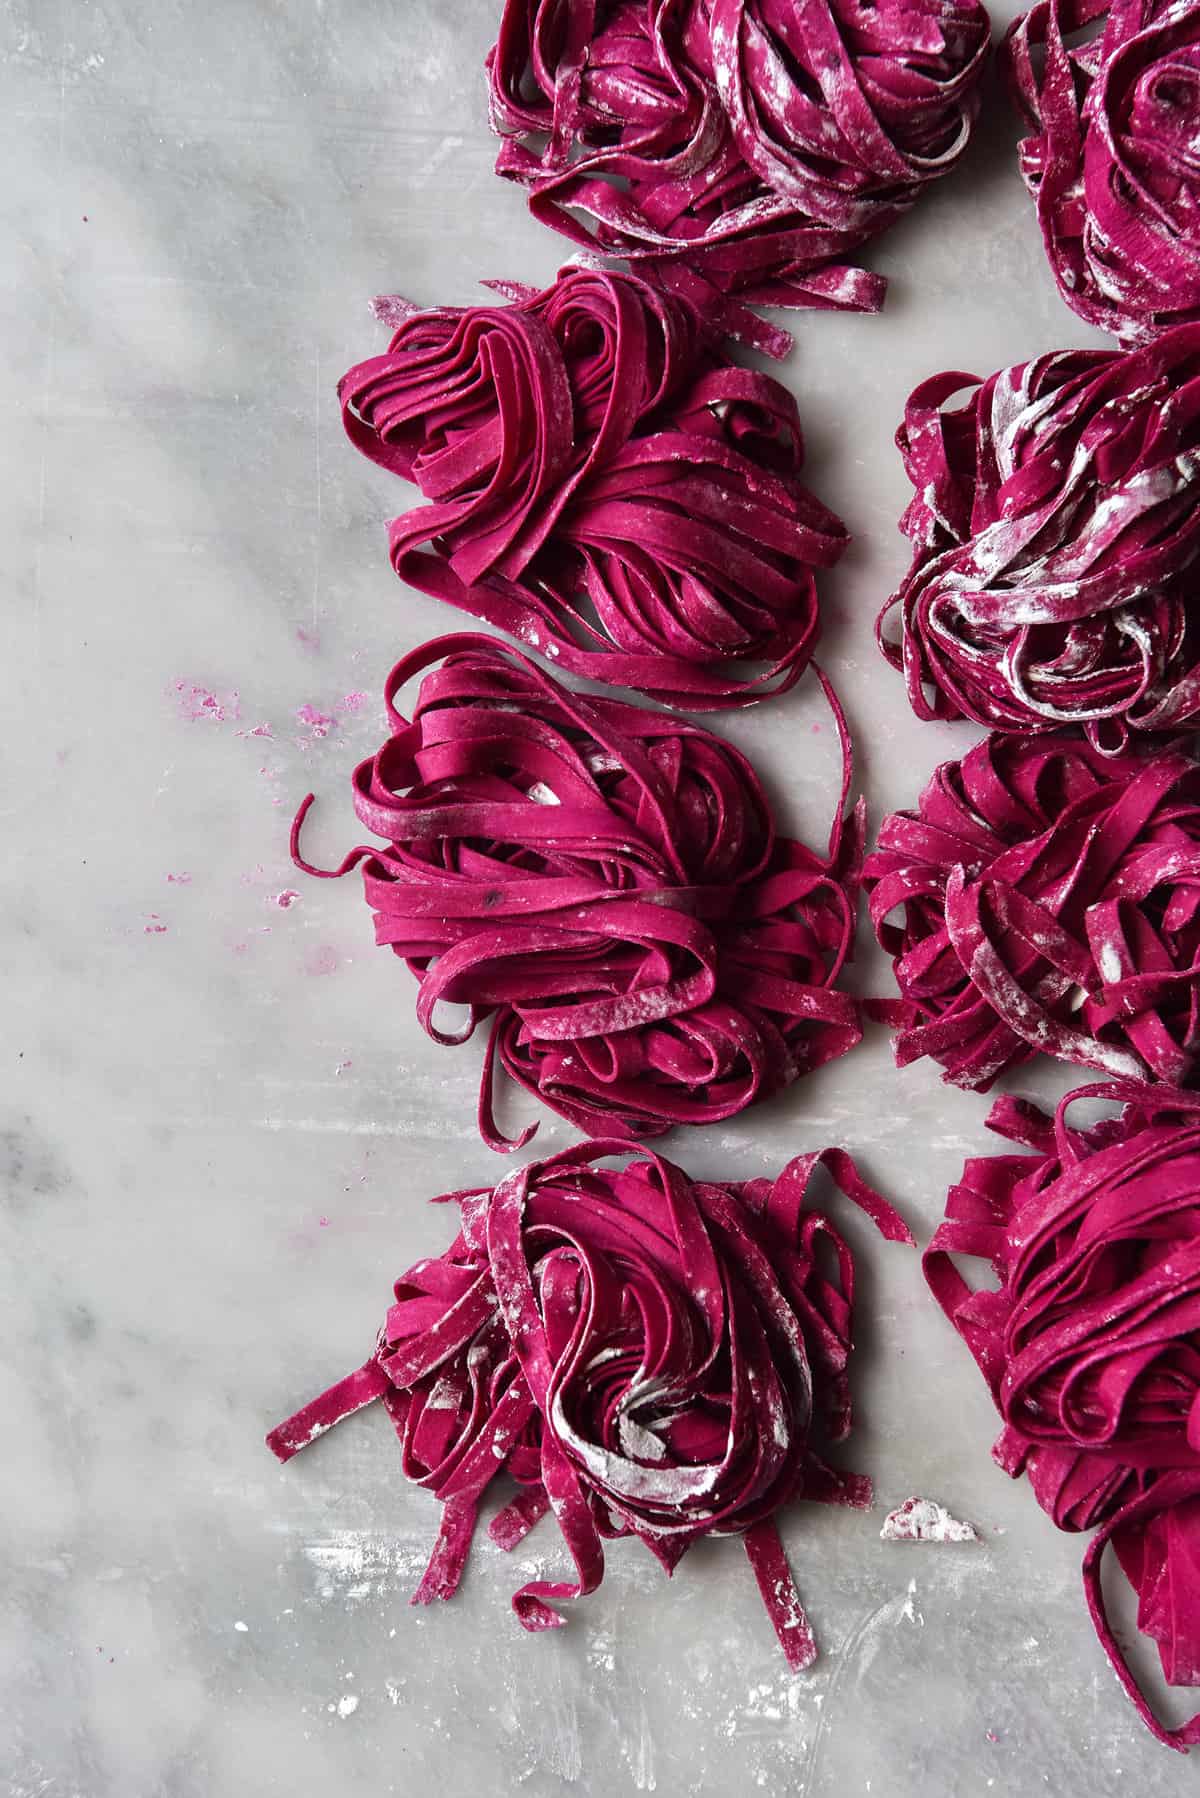 Gluten-free beetroot pasta arranged in nests atop a white marble backdrop.